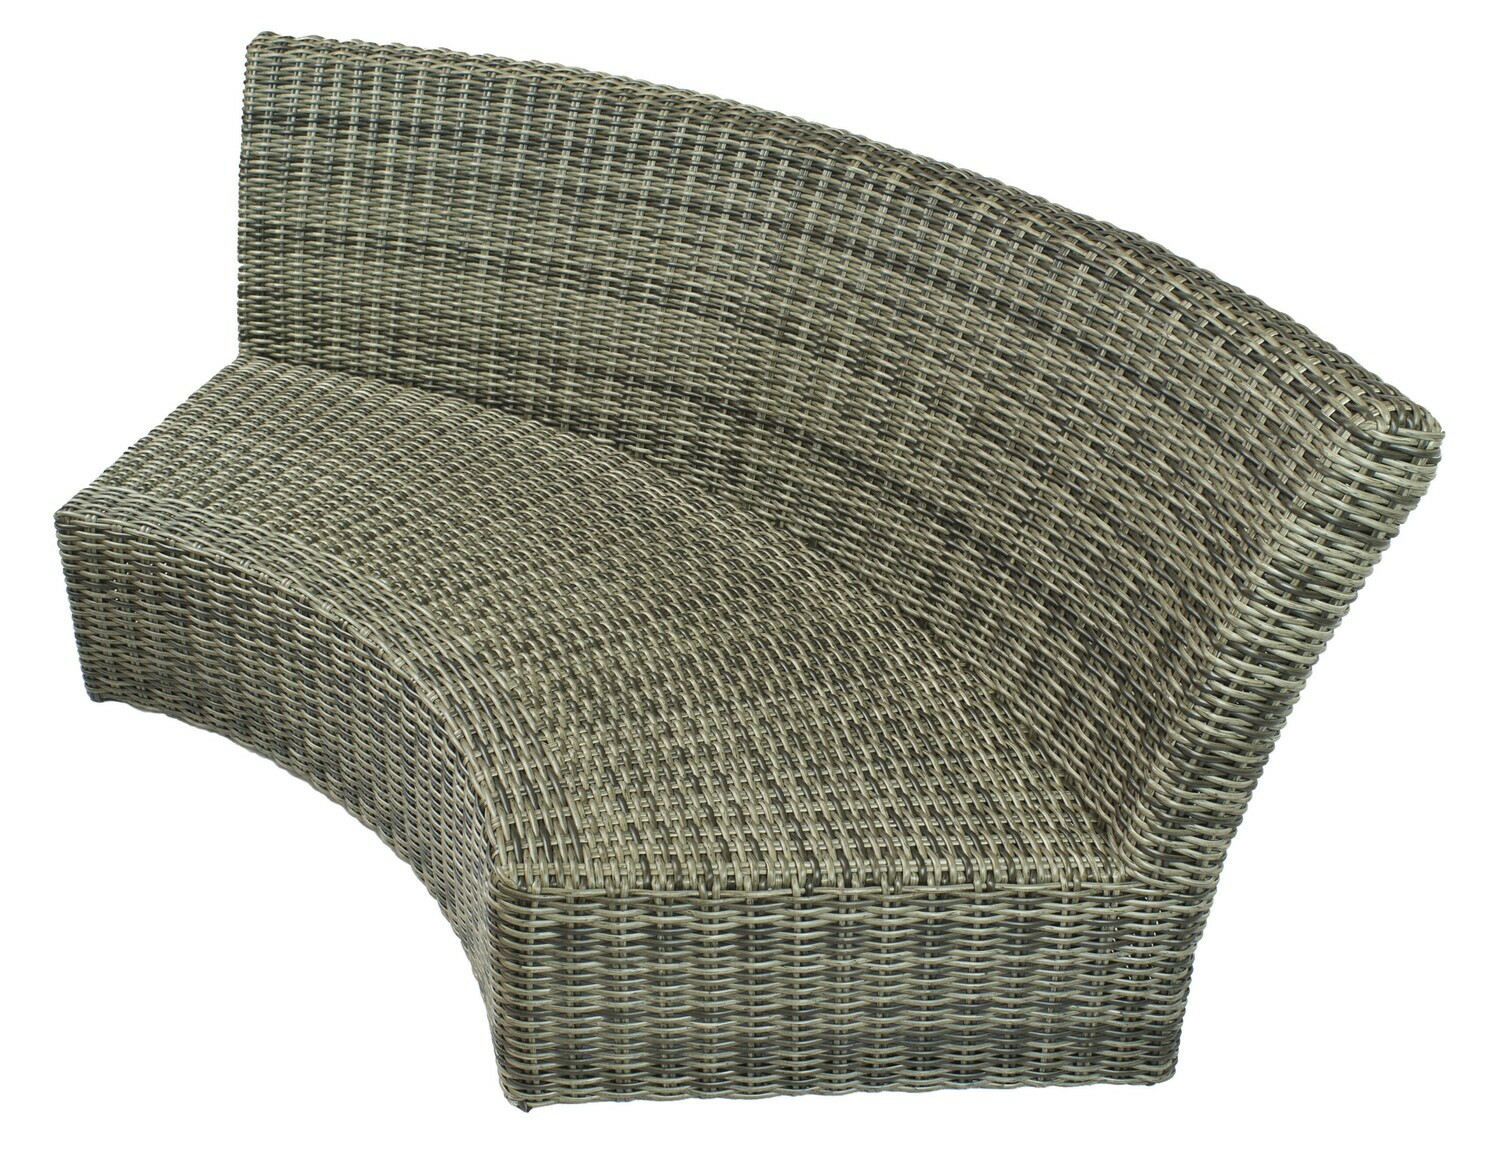 Allegro Wicker Collection Curved Sofa Section